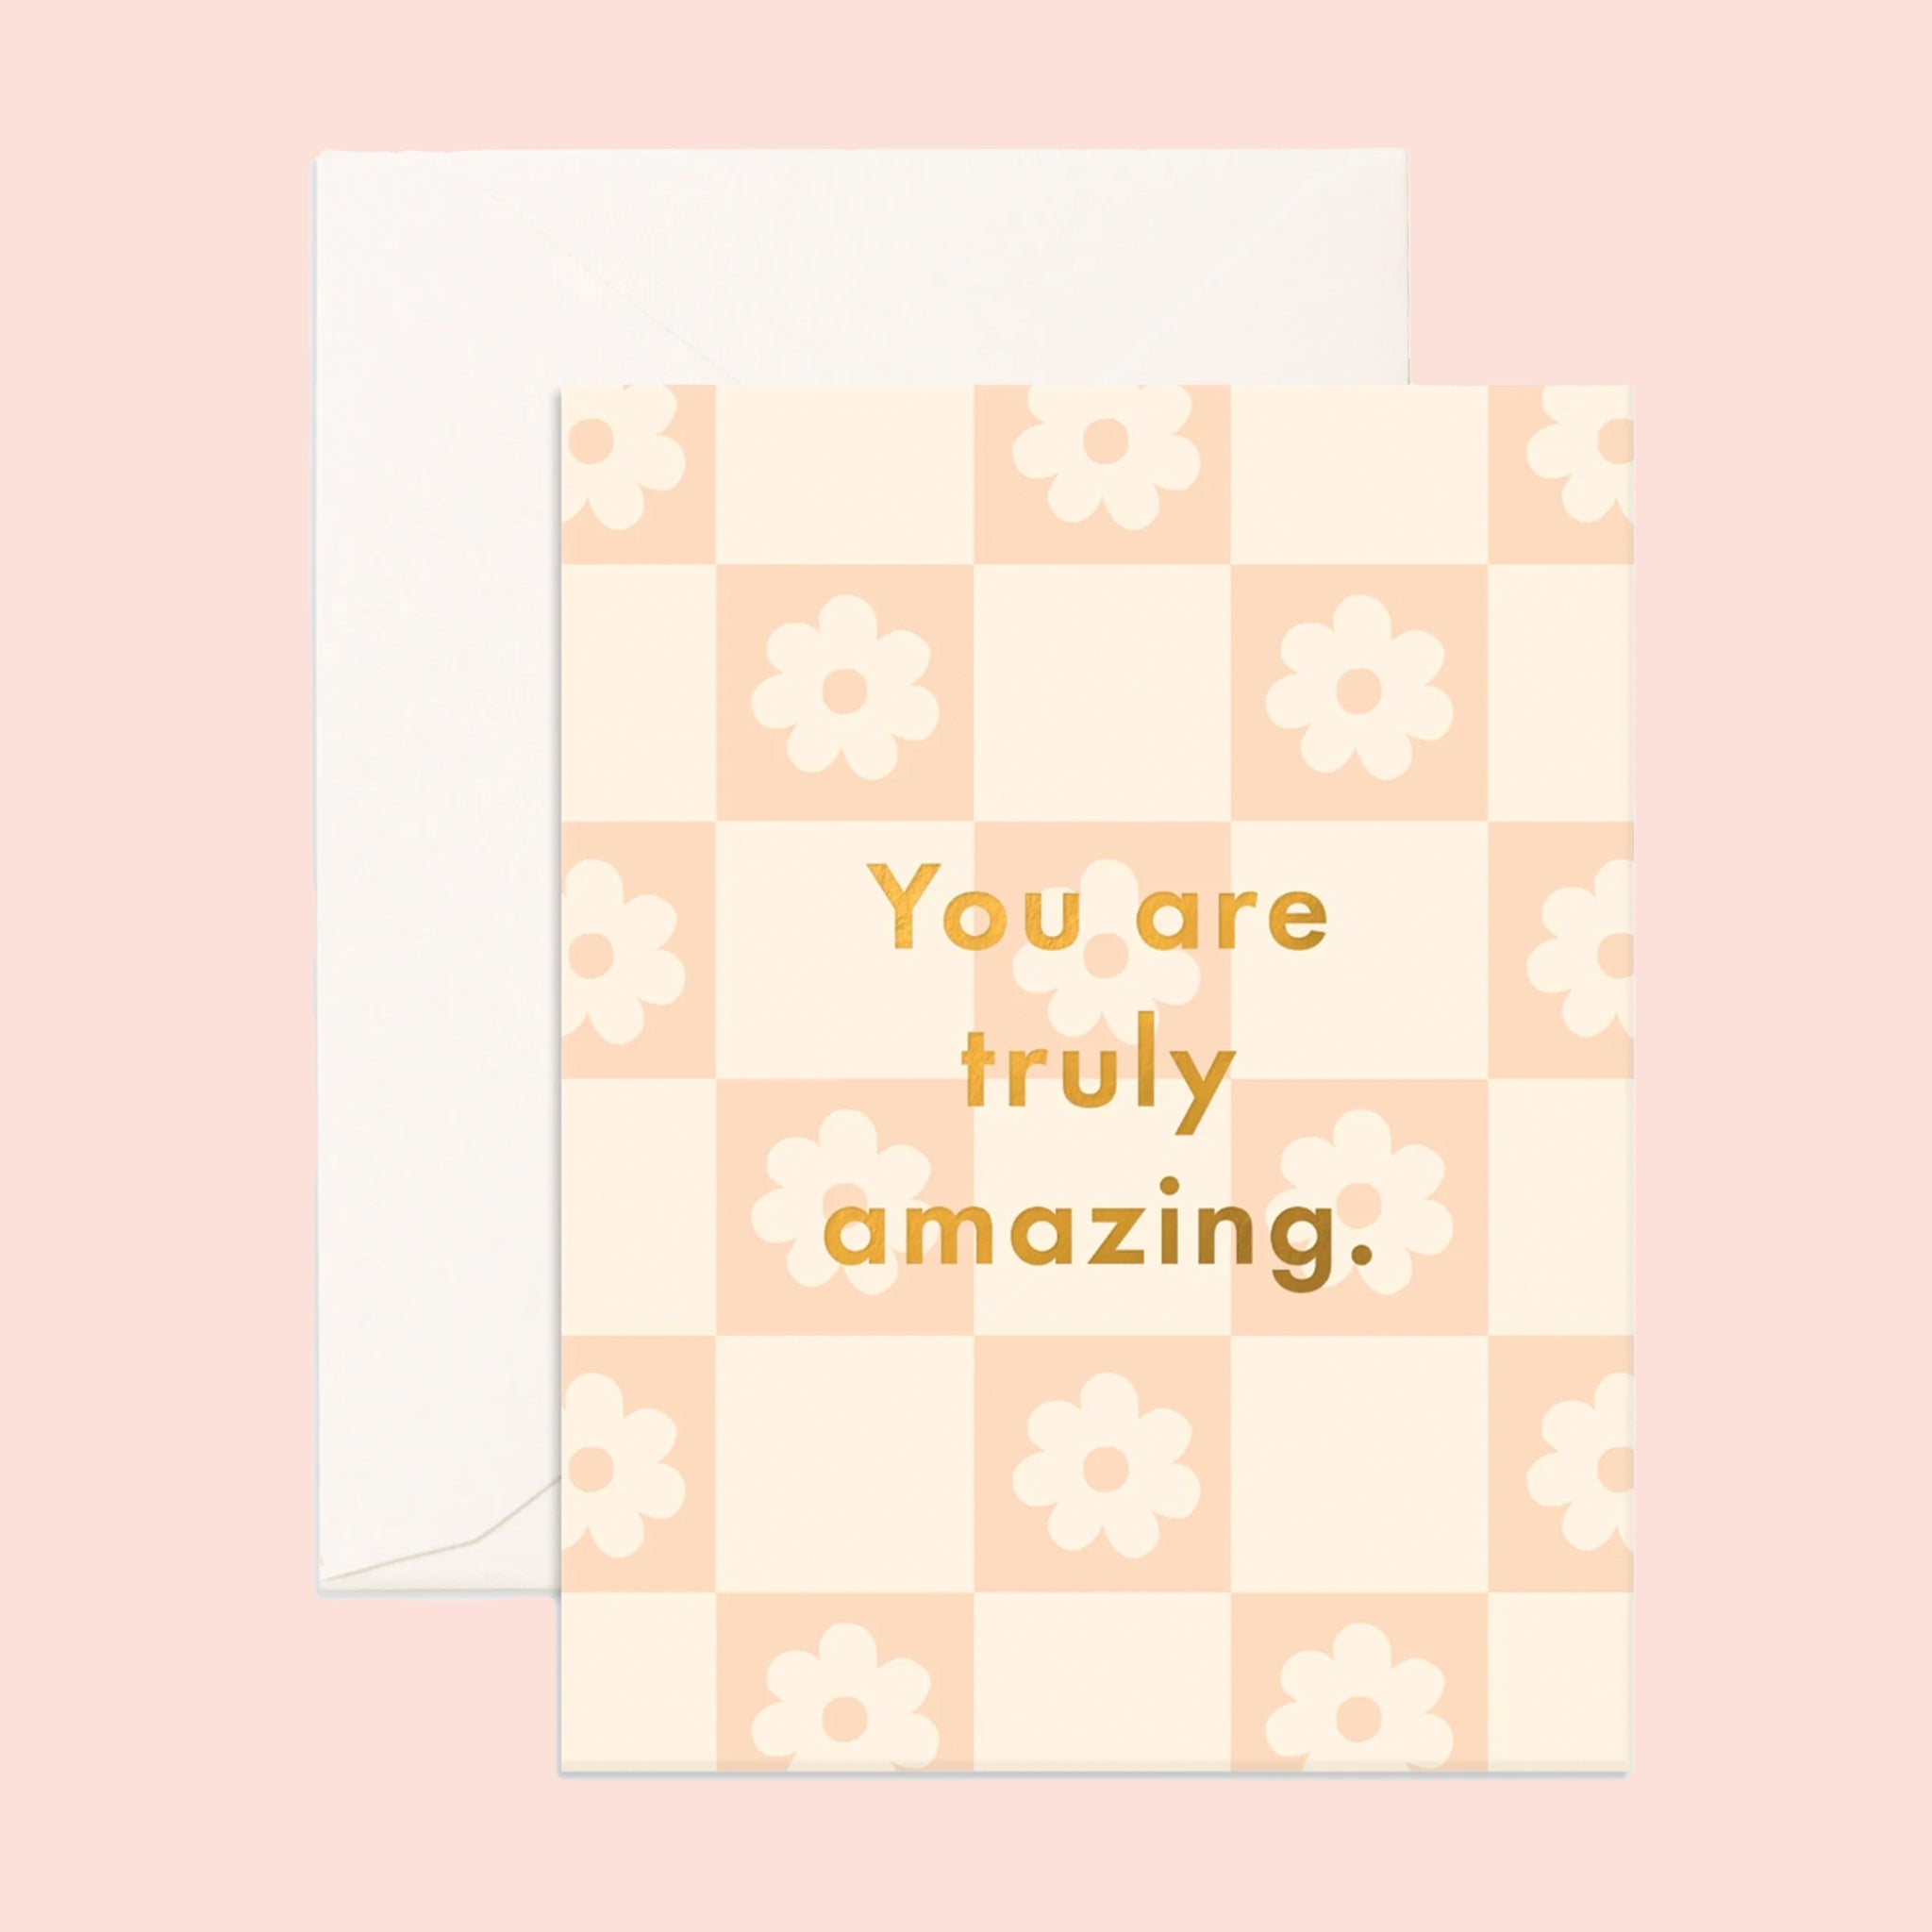 On a pink background is a daisy print checker card with gold text in the center that reads, "You are truly amazing."